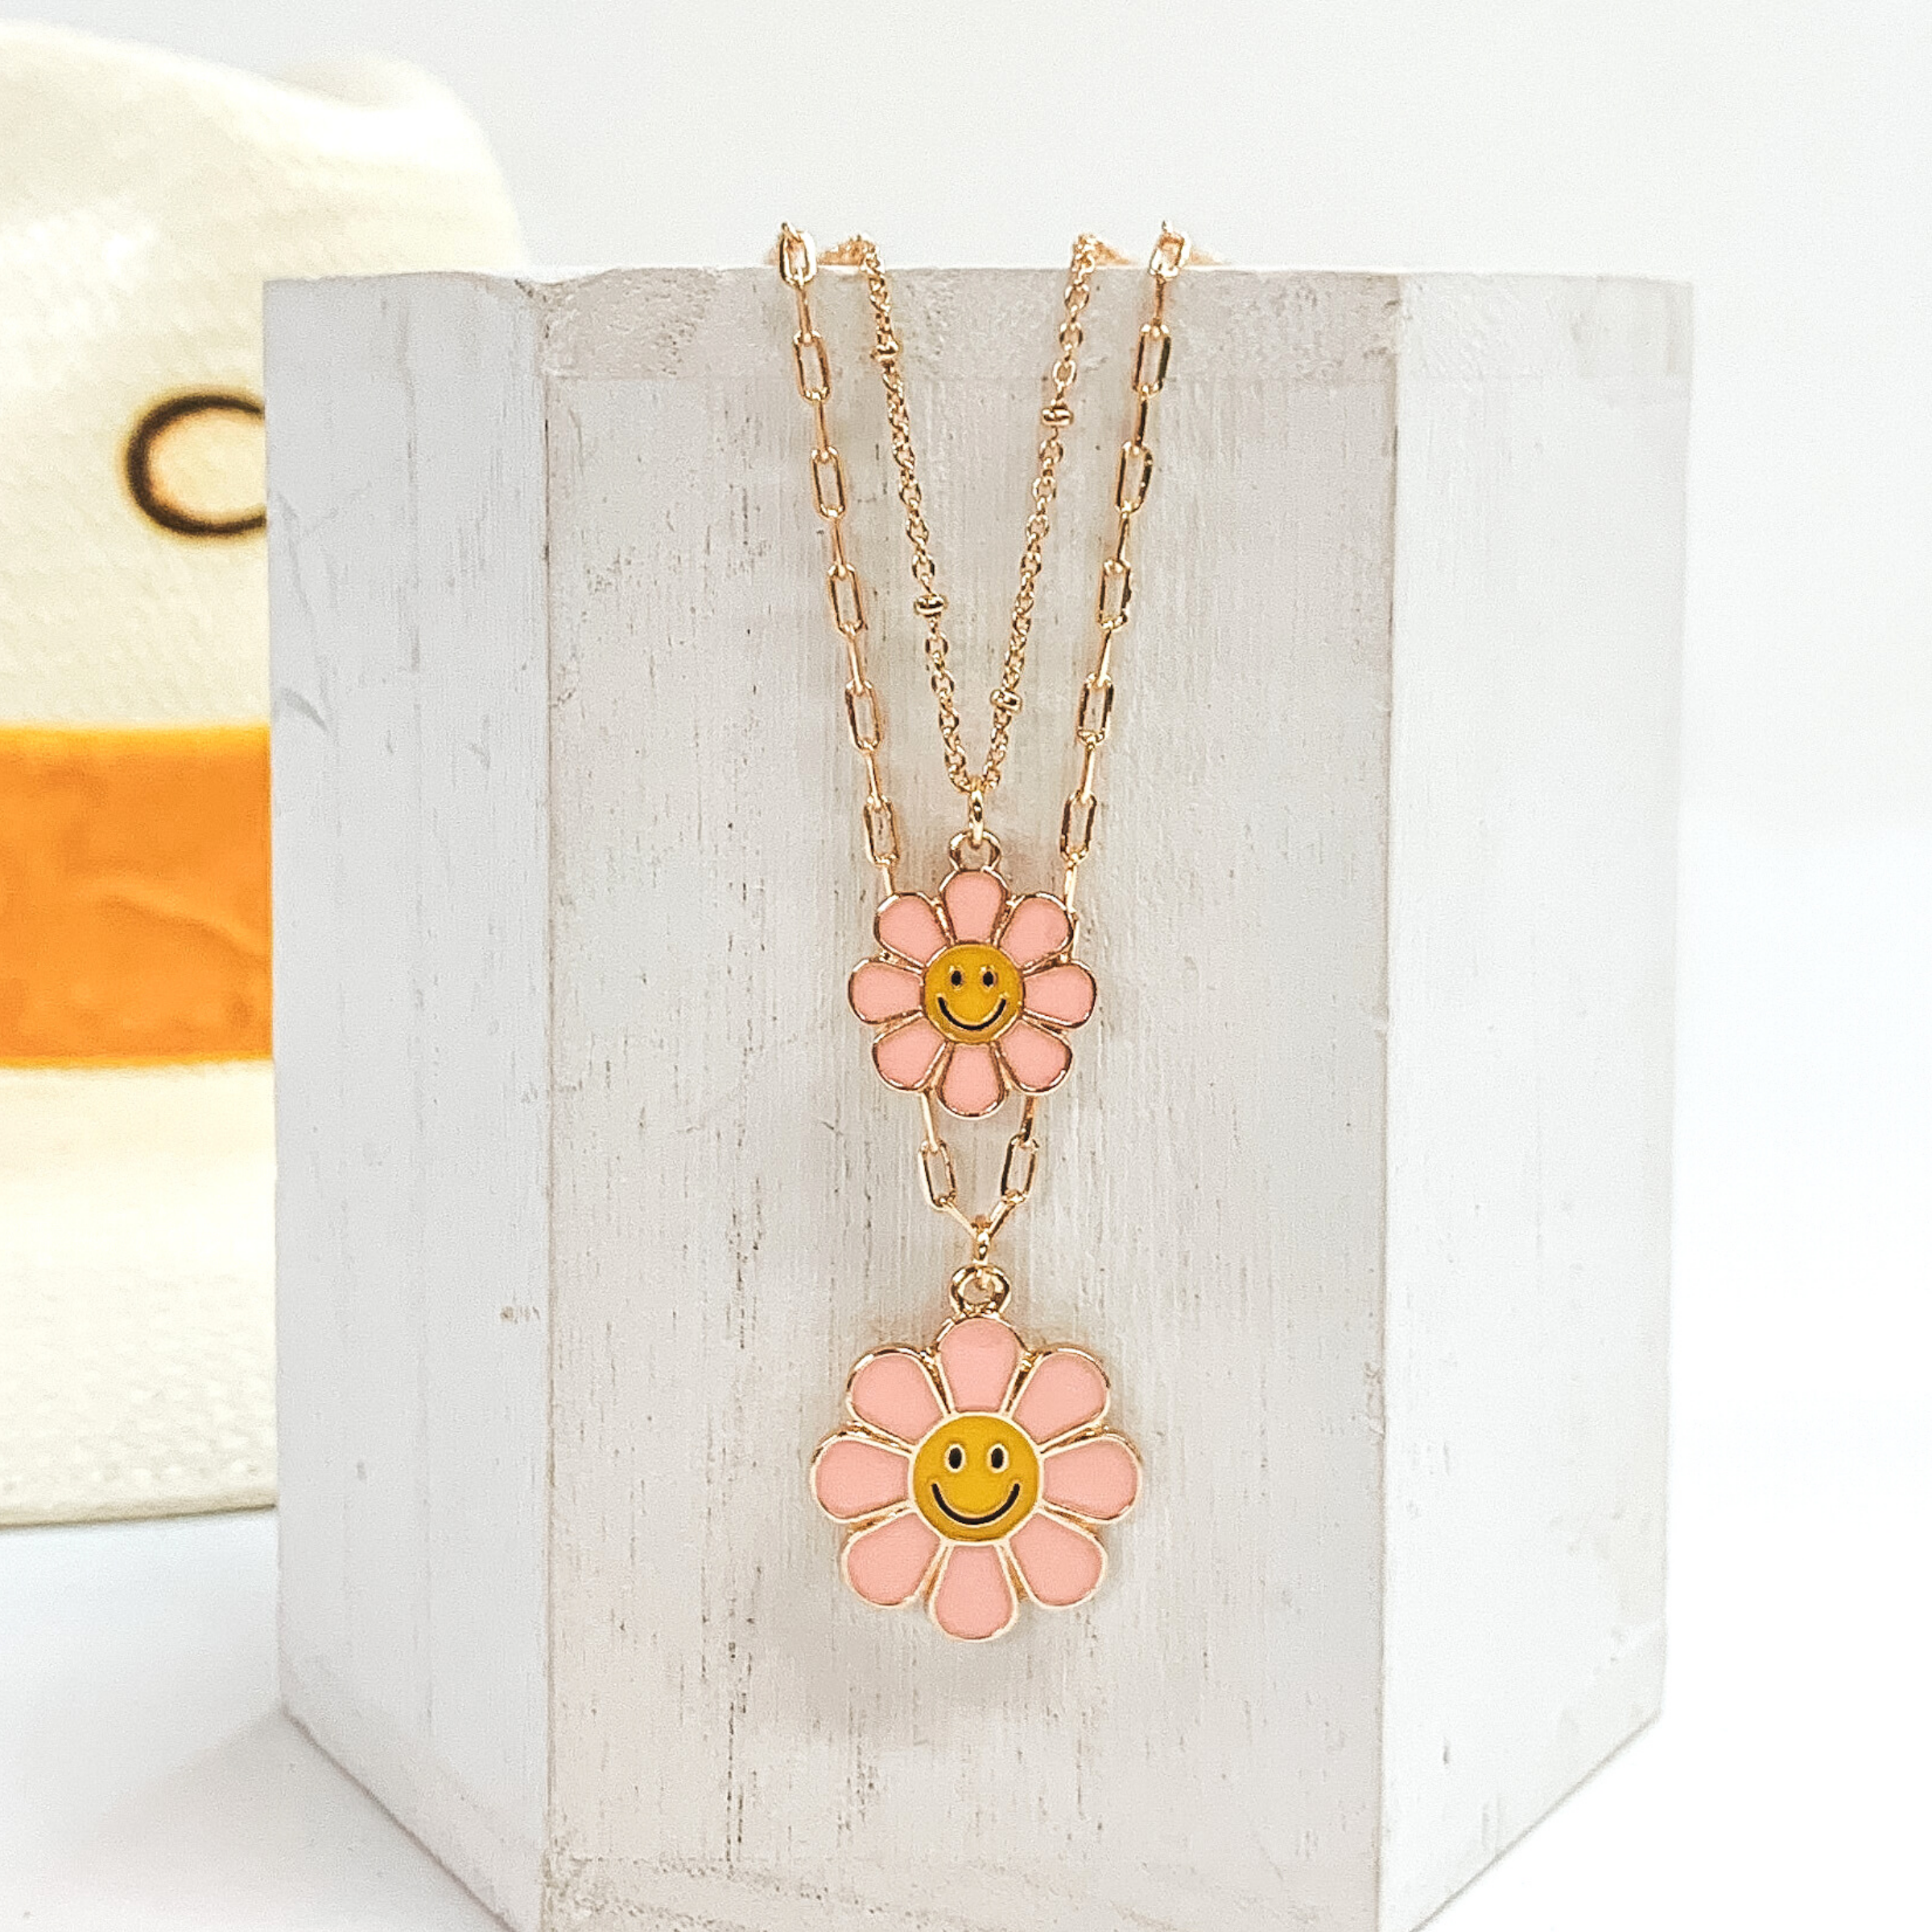 Gold double chained necklace. One strand has a baby pink flower pendant with a yellow center and black smiley face. The other strand is longer and has a slightly bigger baby pink flower pendant with a yellow center and black smiley face. This necklace is pictured laying on a white block on a white background with a straw hat with a yellow band in the background. 